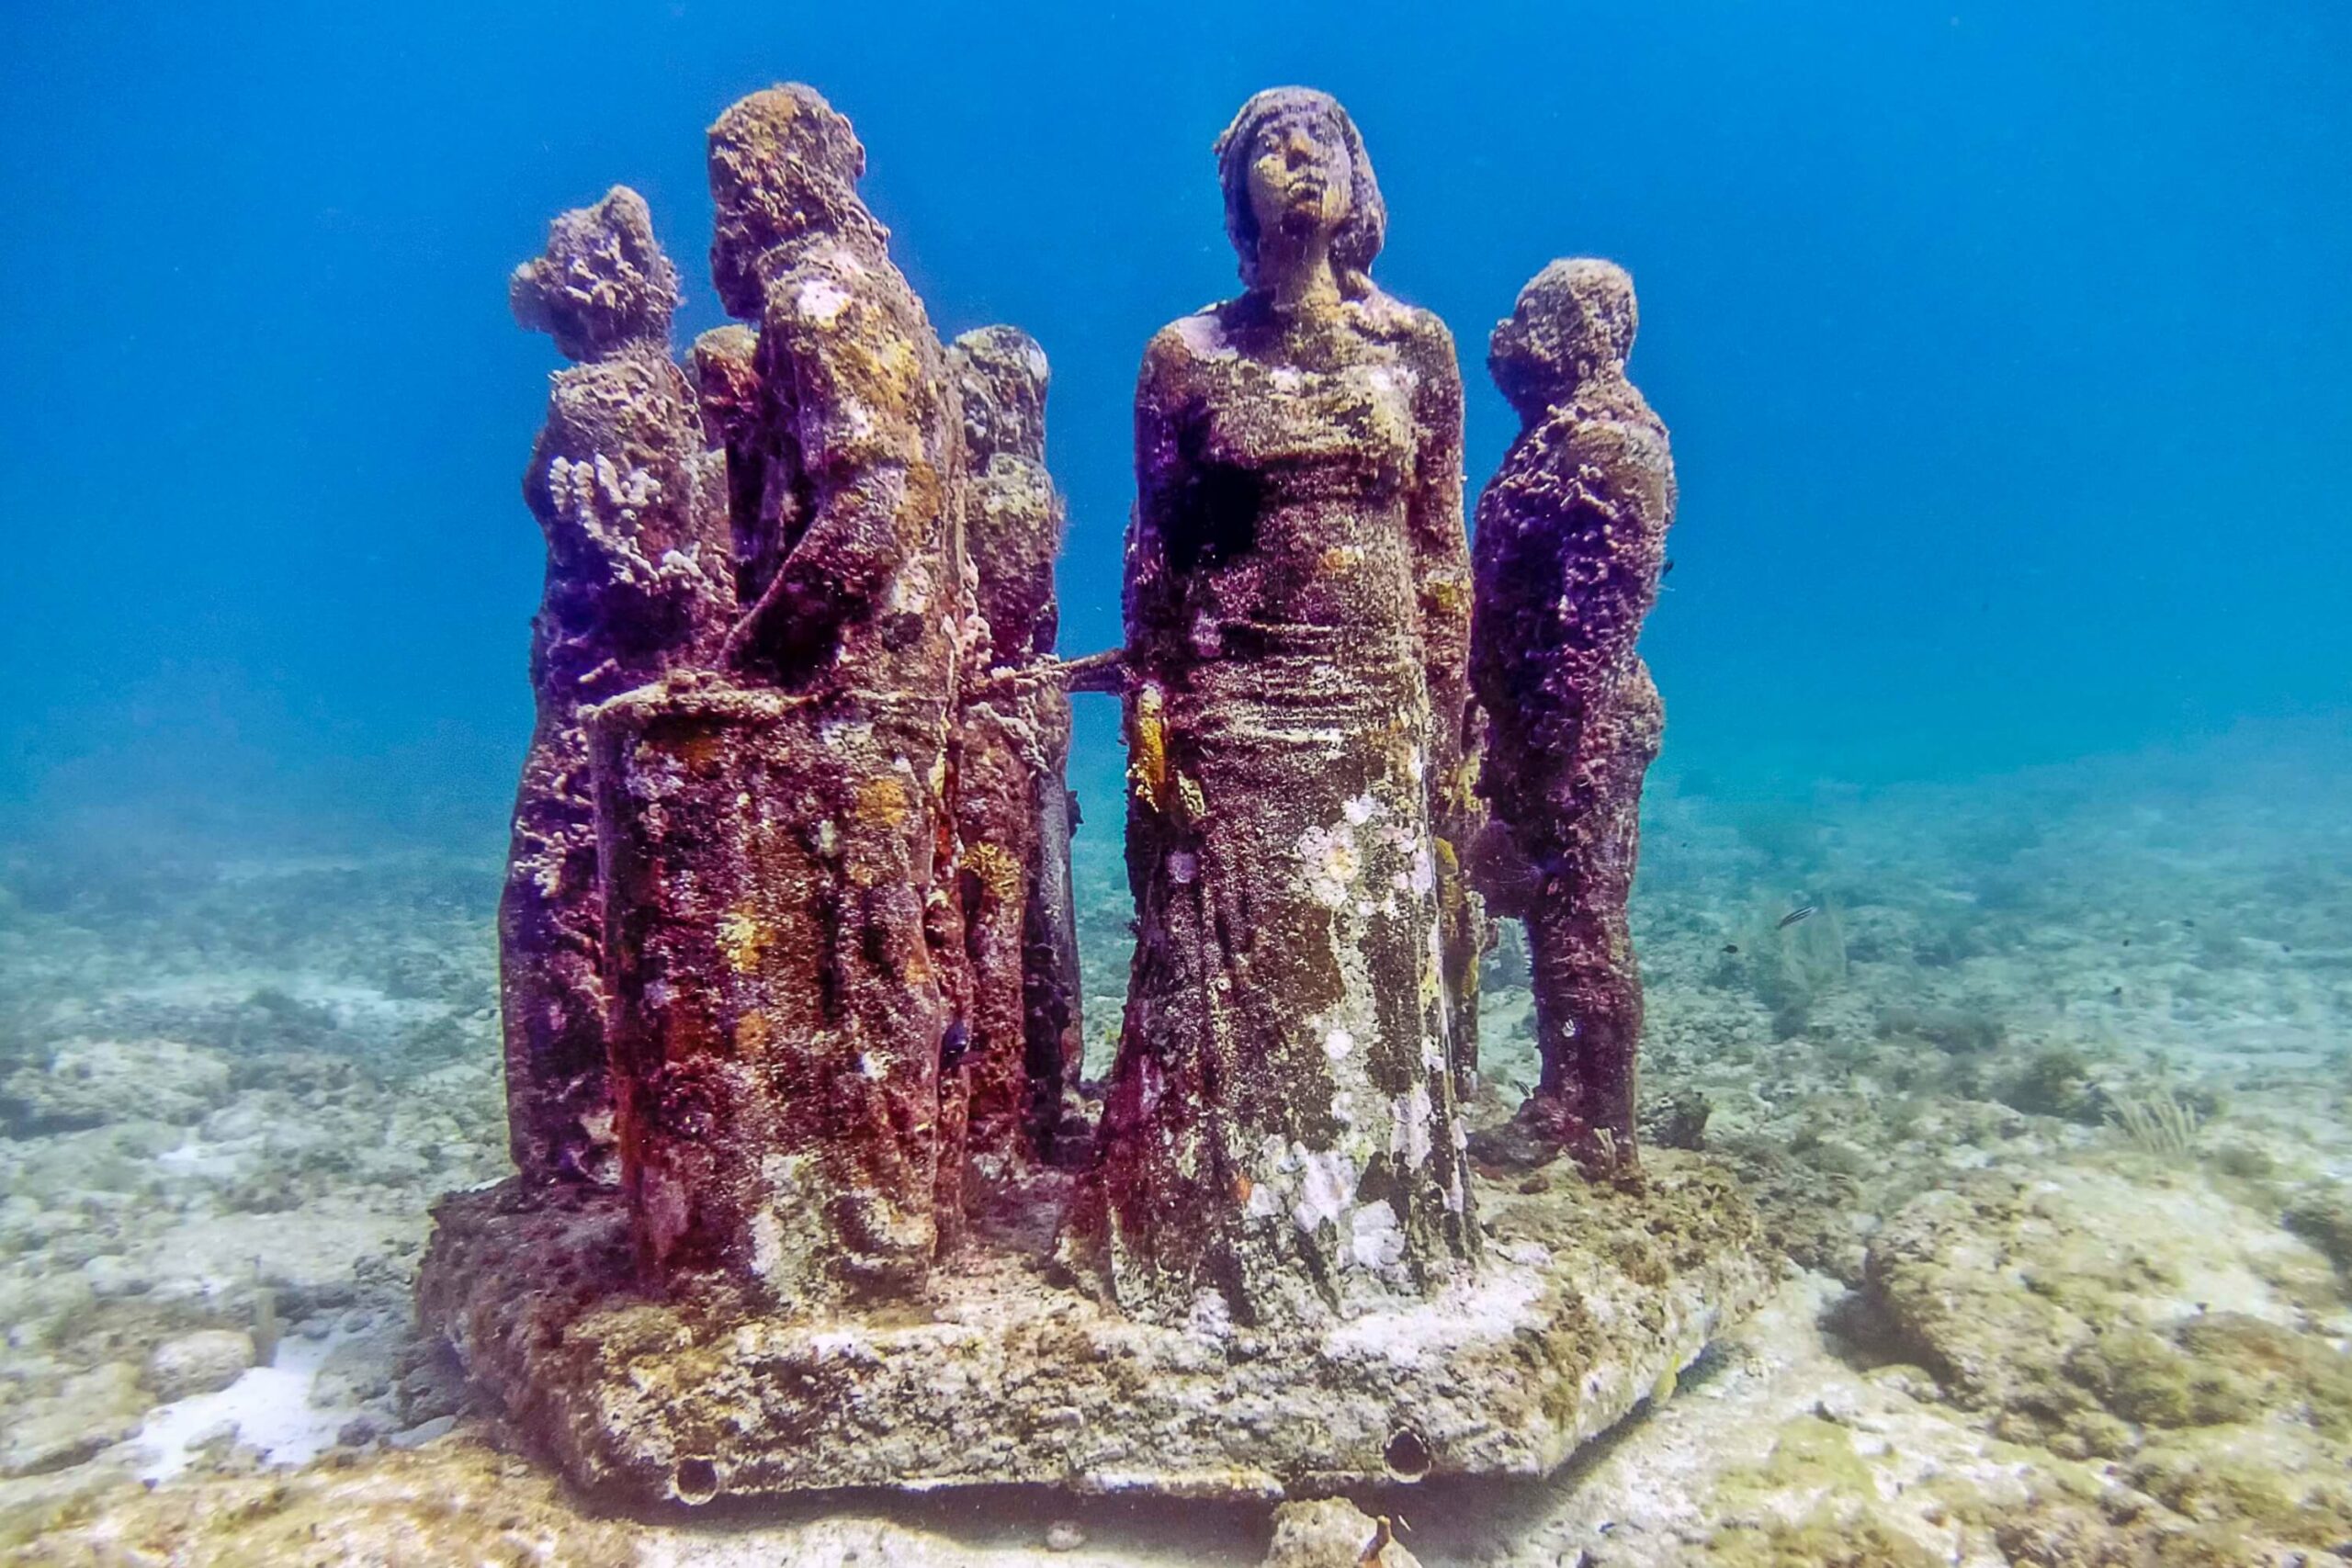 A cluster of statues on a coral reef in the Cancun underwater museum offers a unique opportunity for underwater exploration during your holiday.